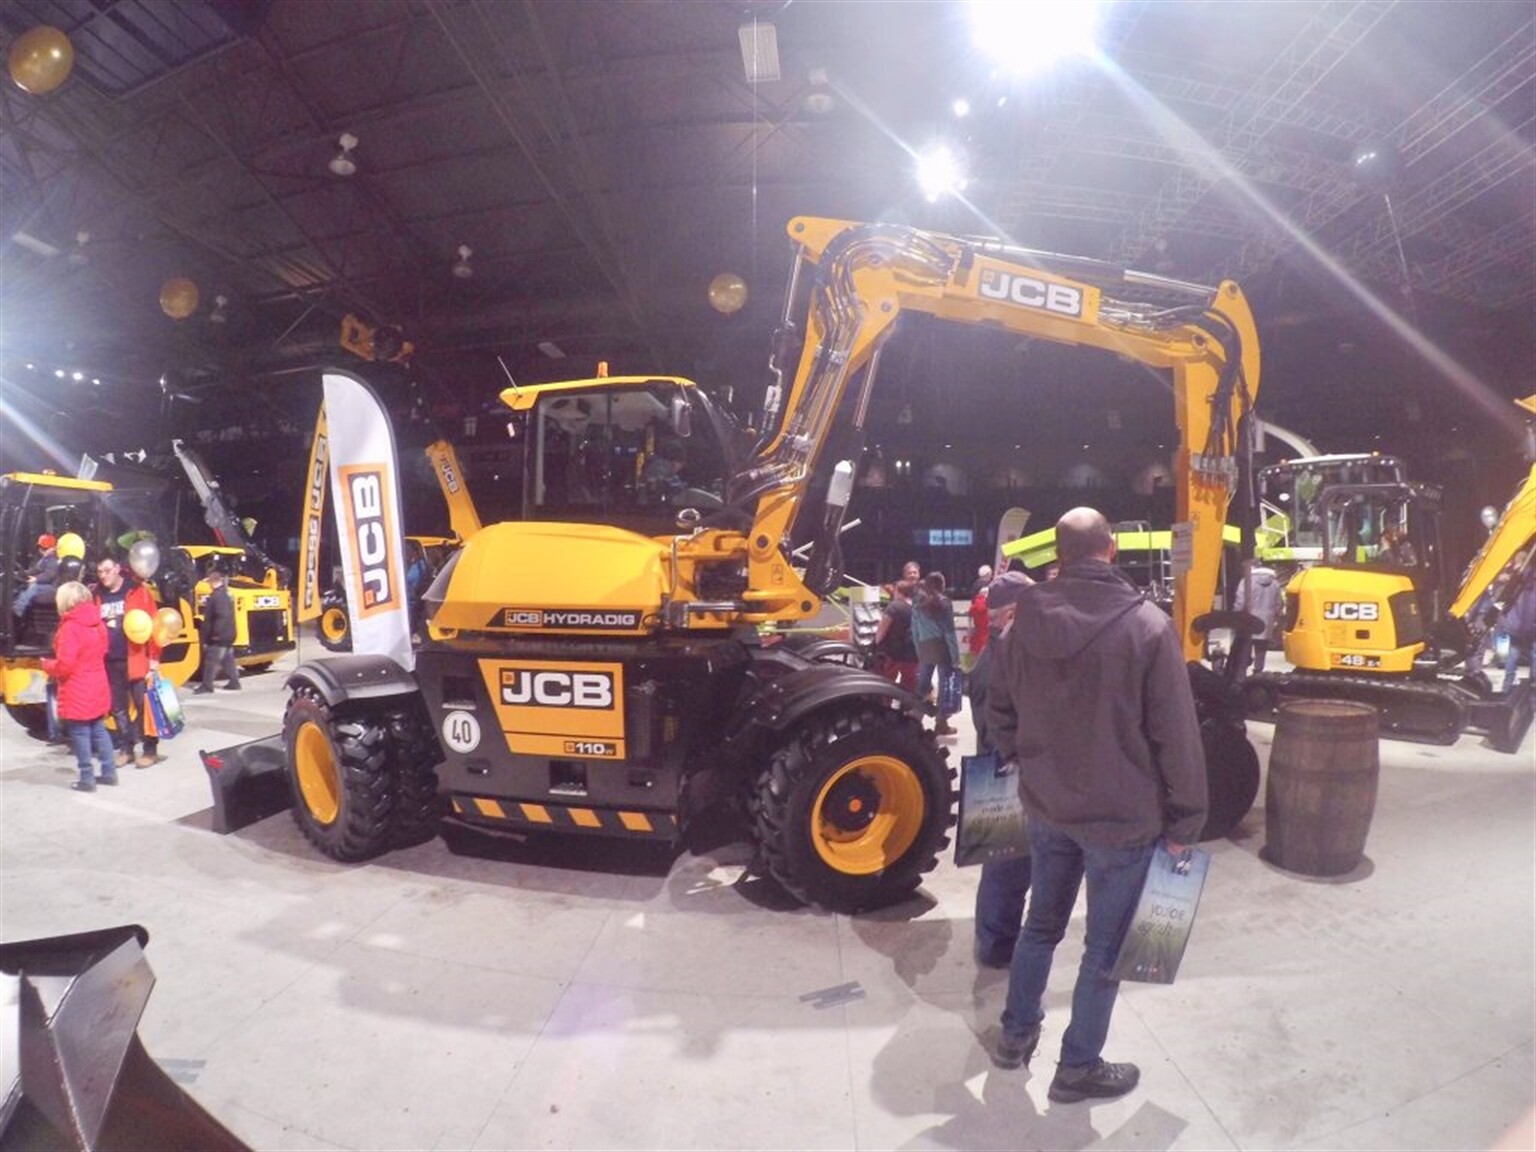 Canadian plant man gets into JCB at SIMAQ 2018 in Quebec